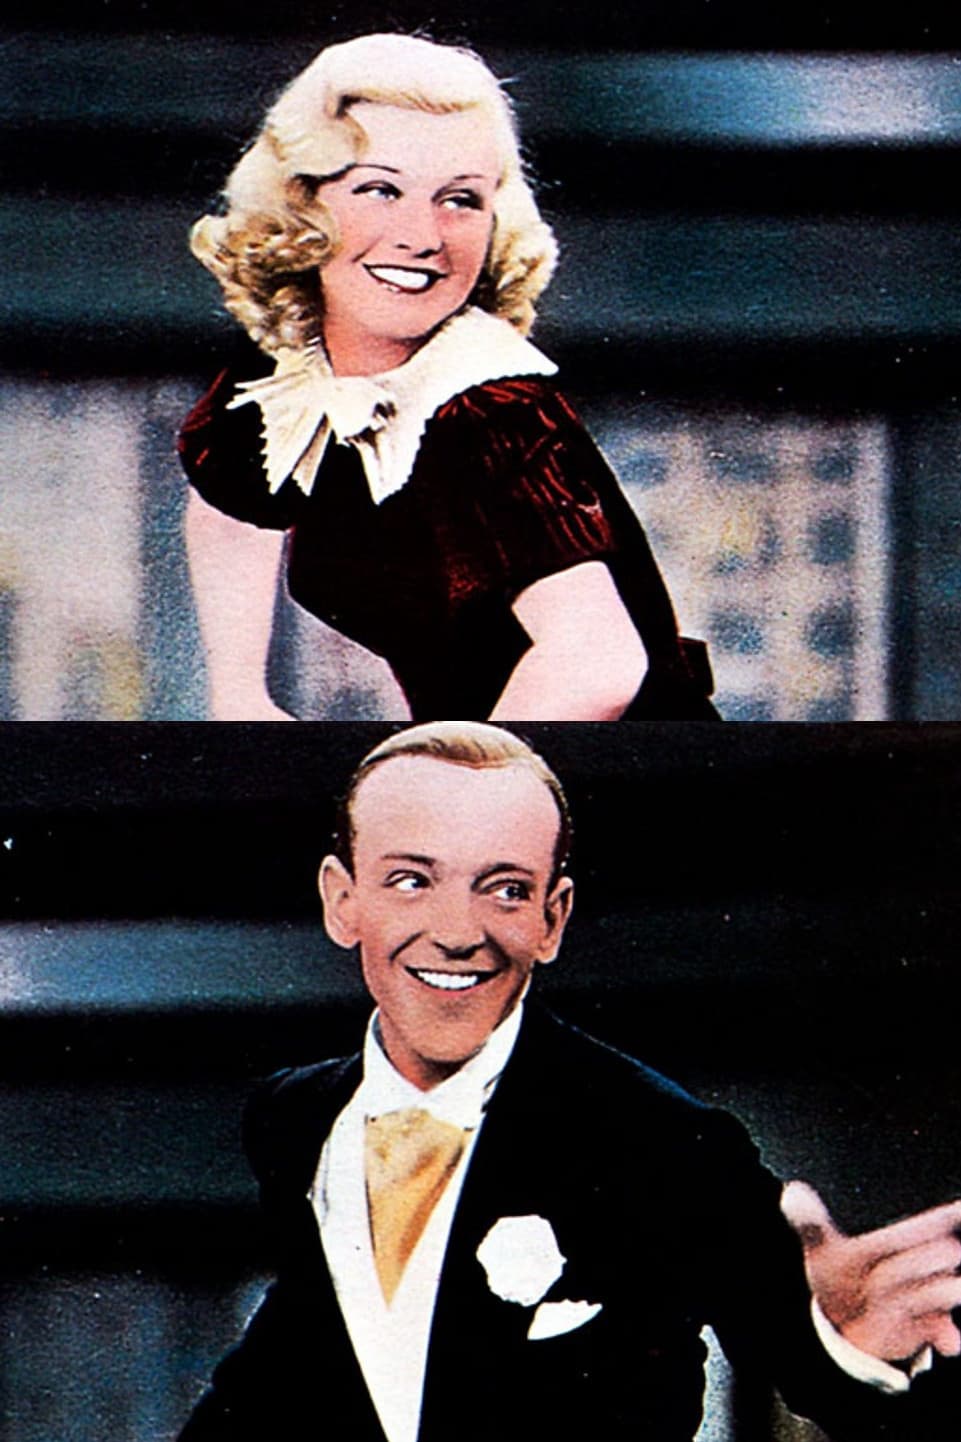 Astaire and Rogers Sing the Great American Songbook